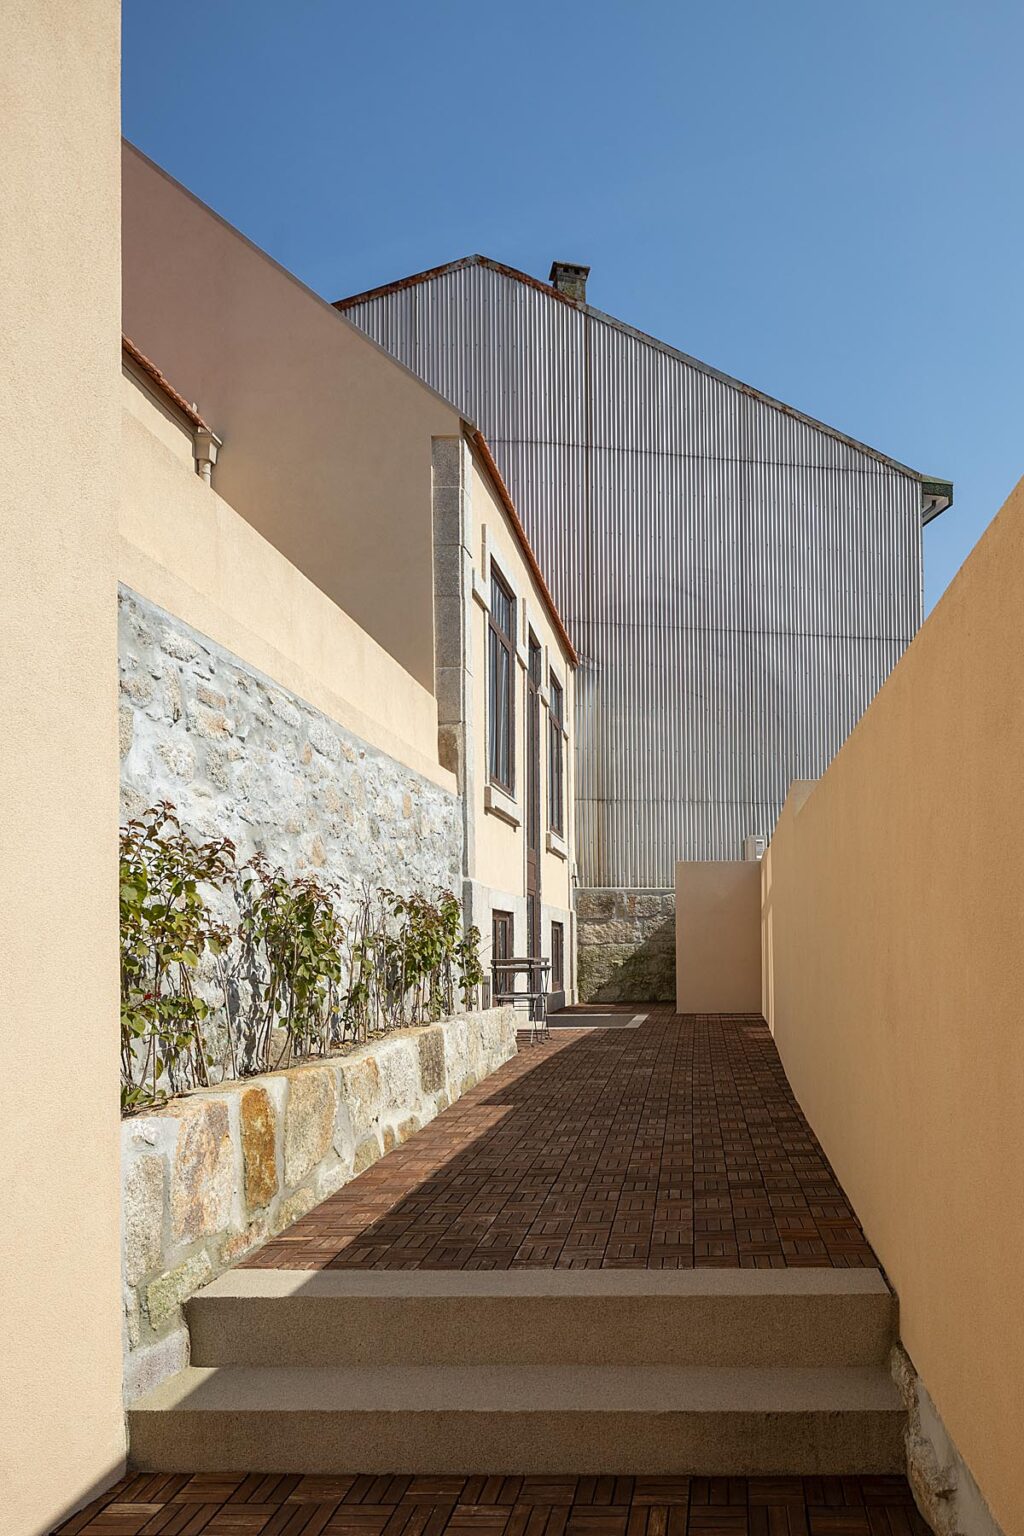 A harmonious fusion of ruined buildings subject to an exceptional building recovery. At Casa do Campo Lindo. Ren Ito Arq